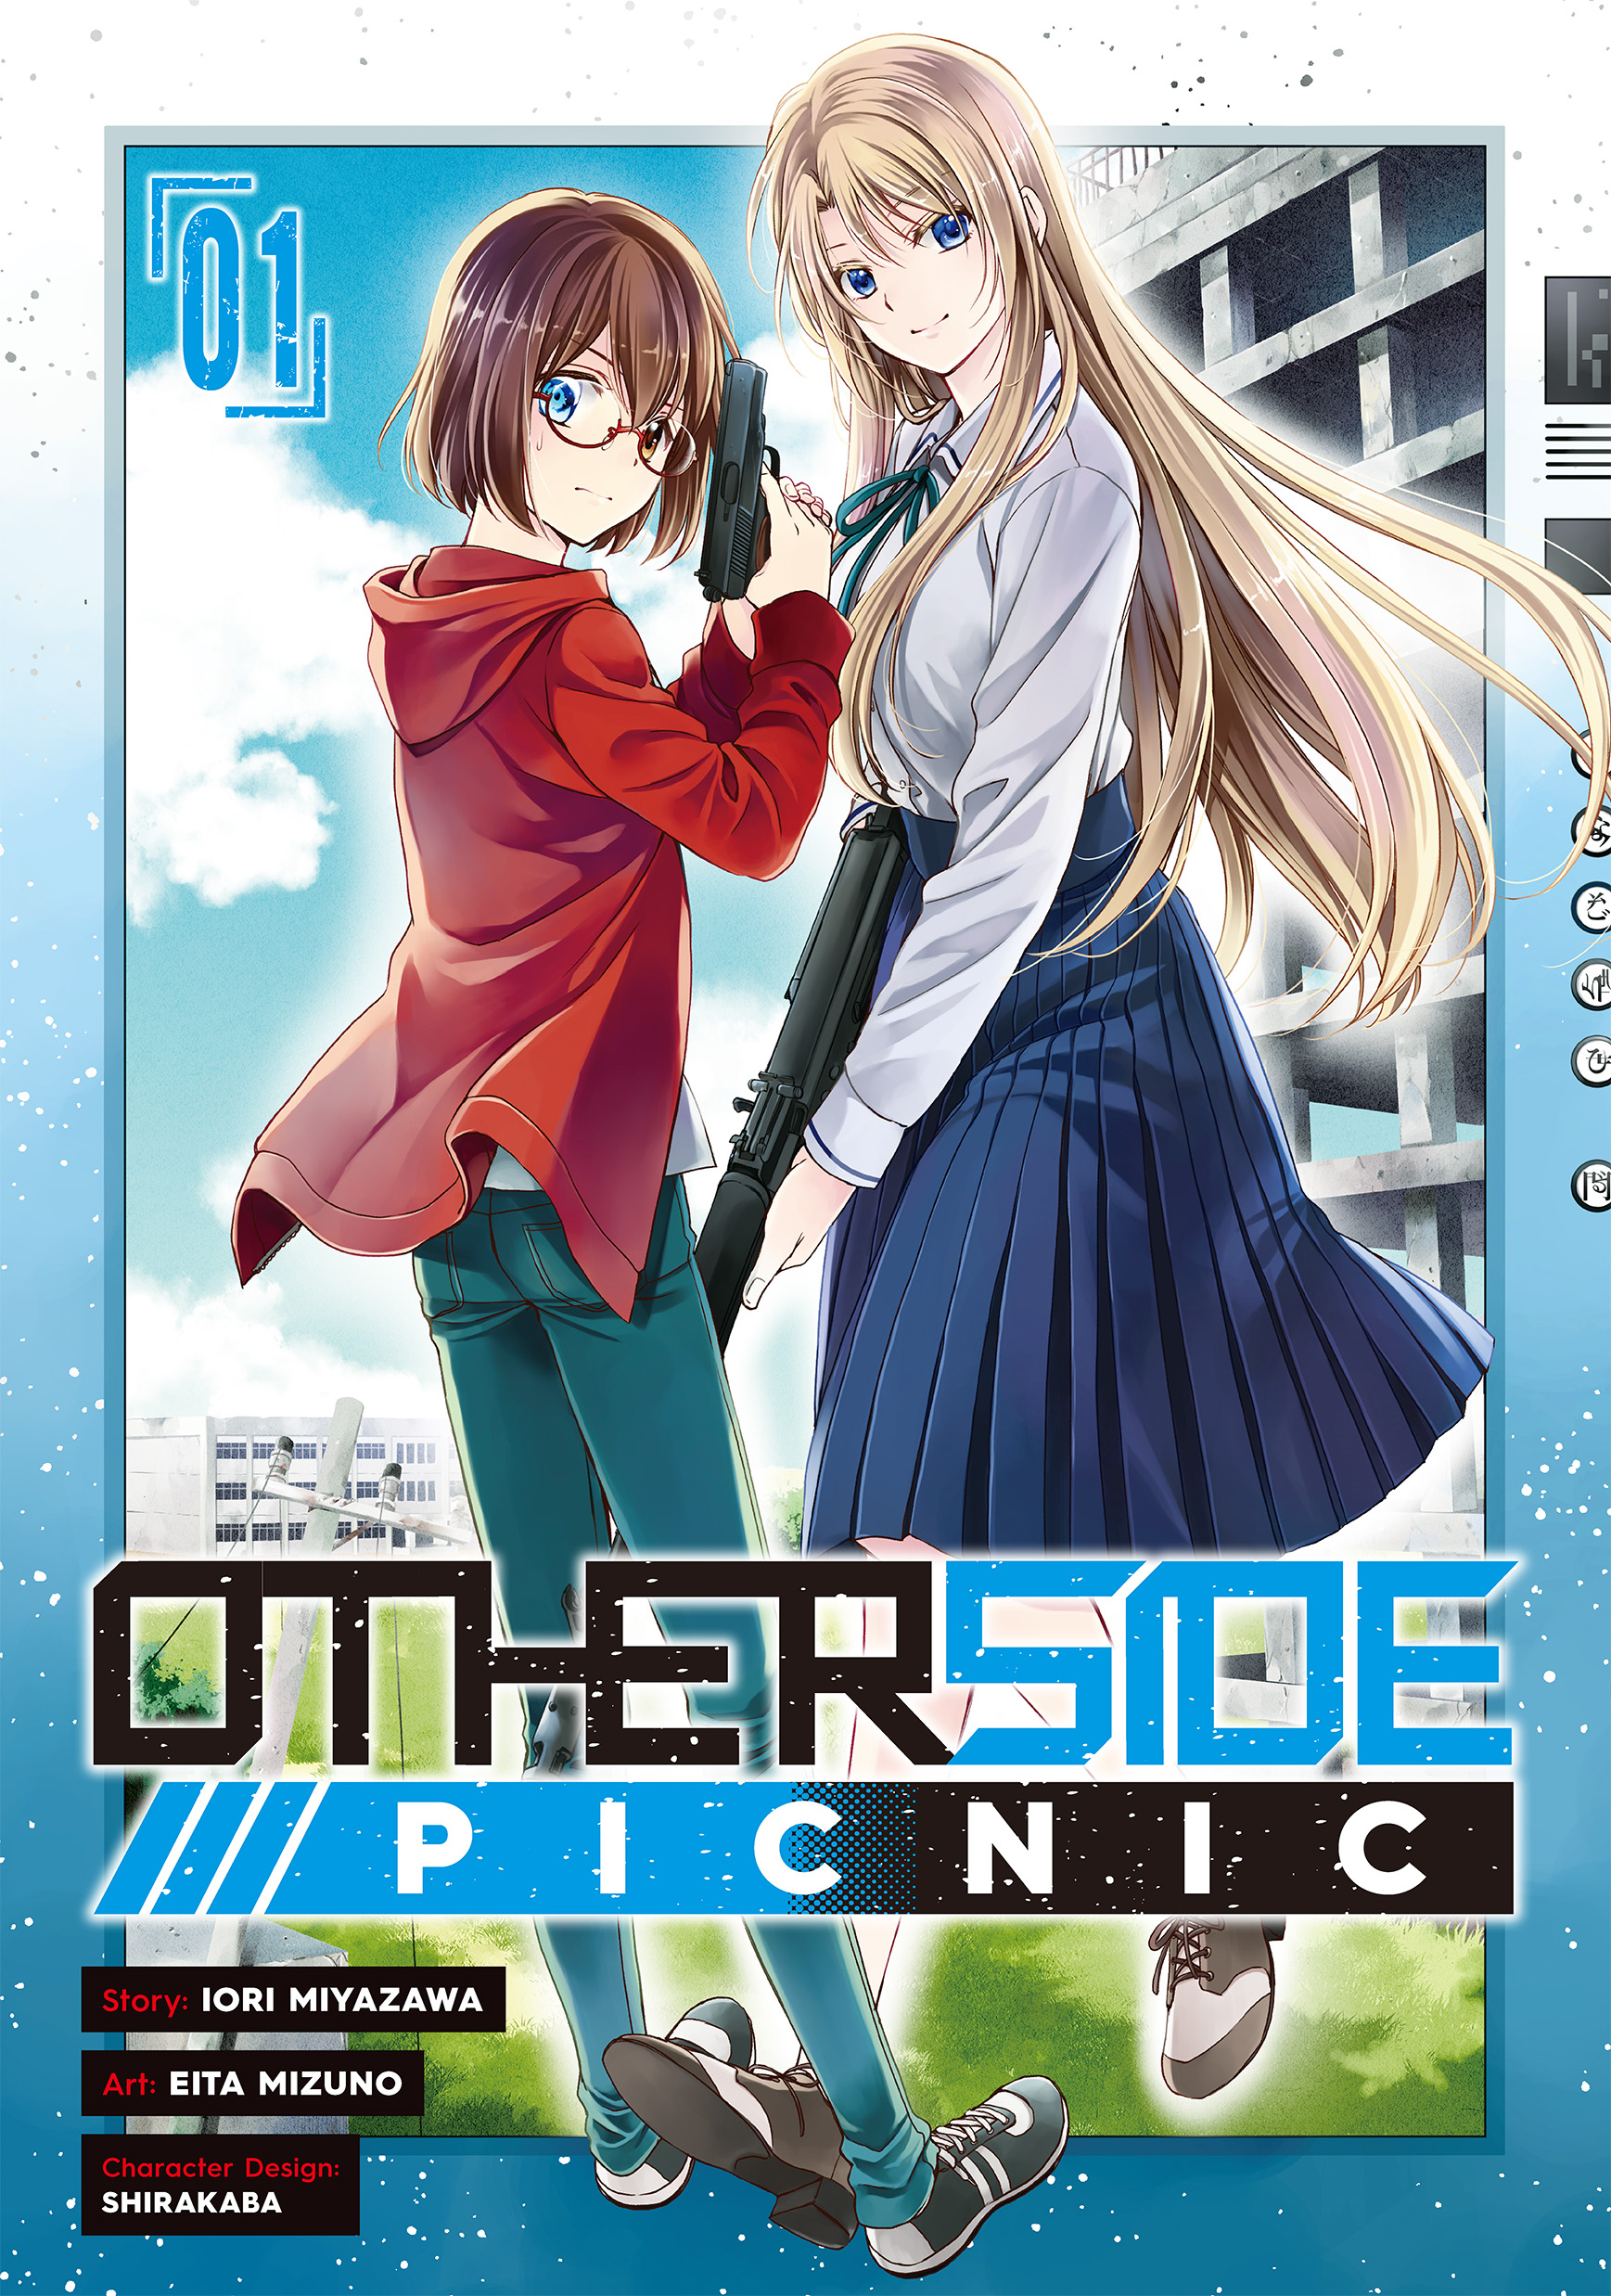 Otherside Picnic Archives - I drink and watch anime